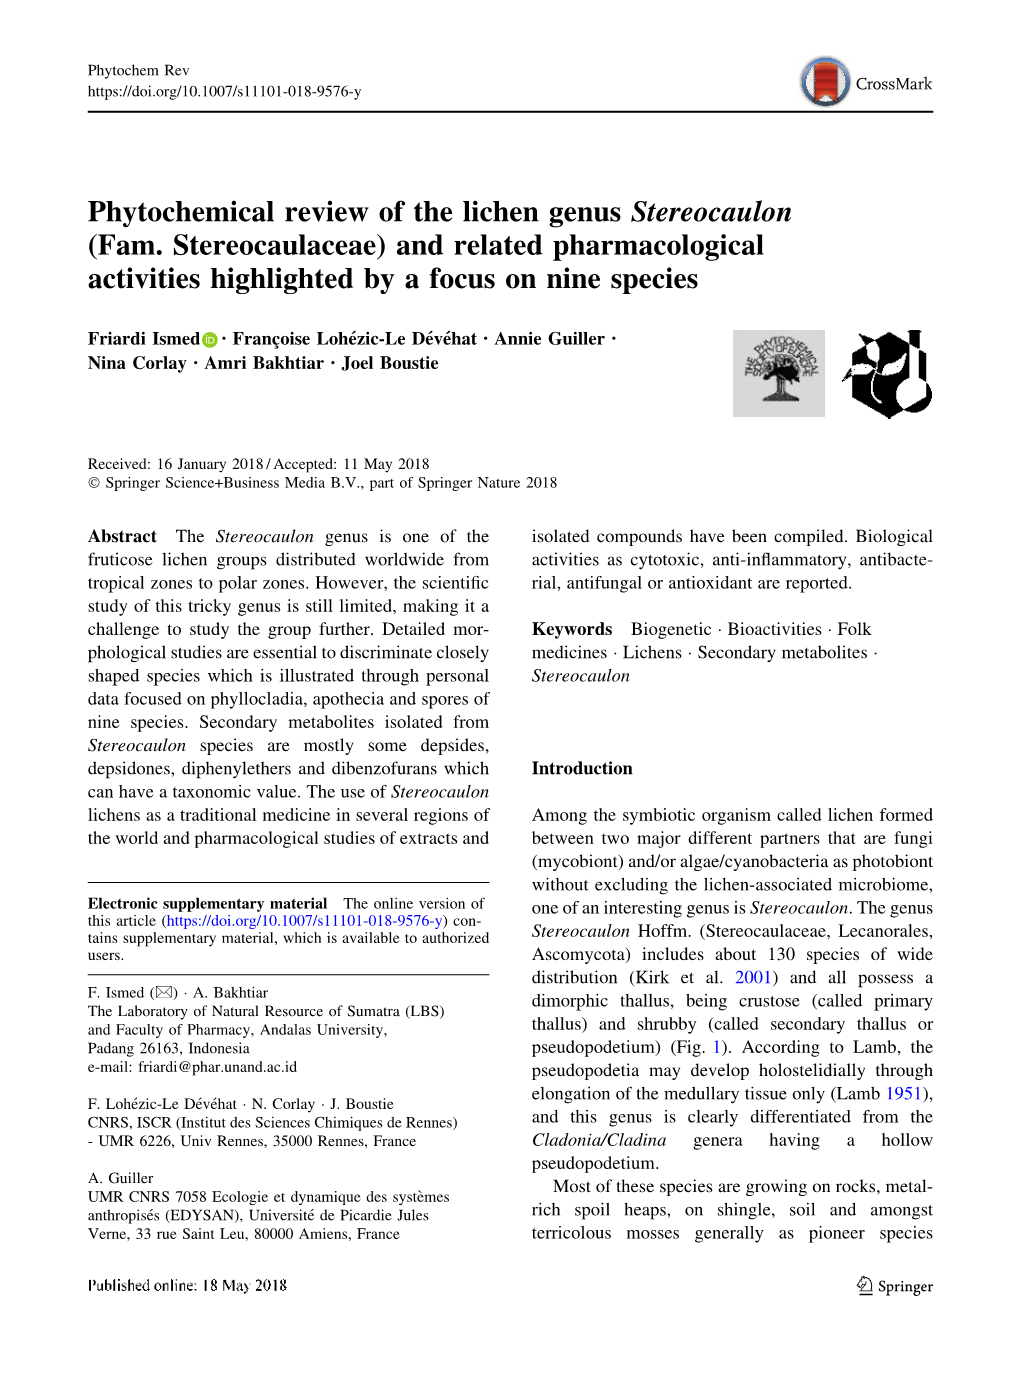 Phytochemical Review of the Lichen Genus Stereocaulon (Fam